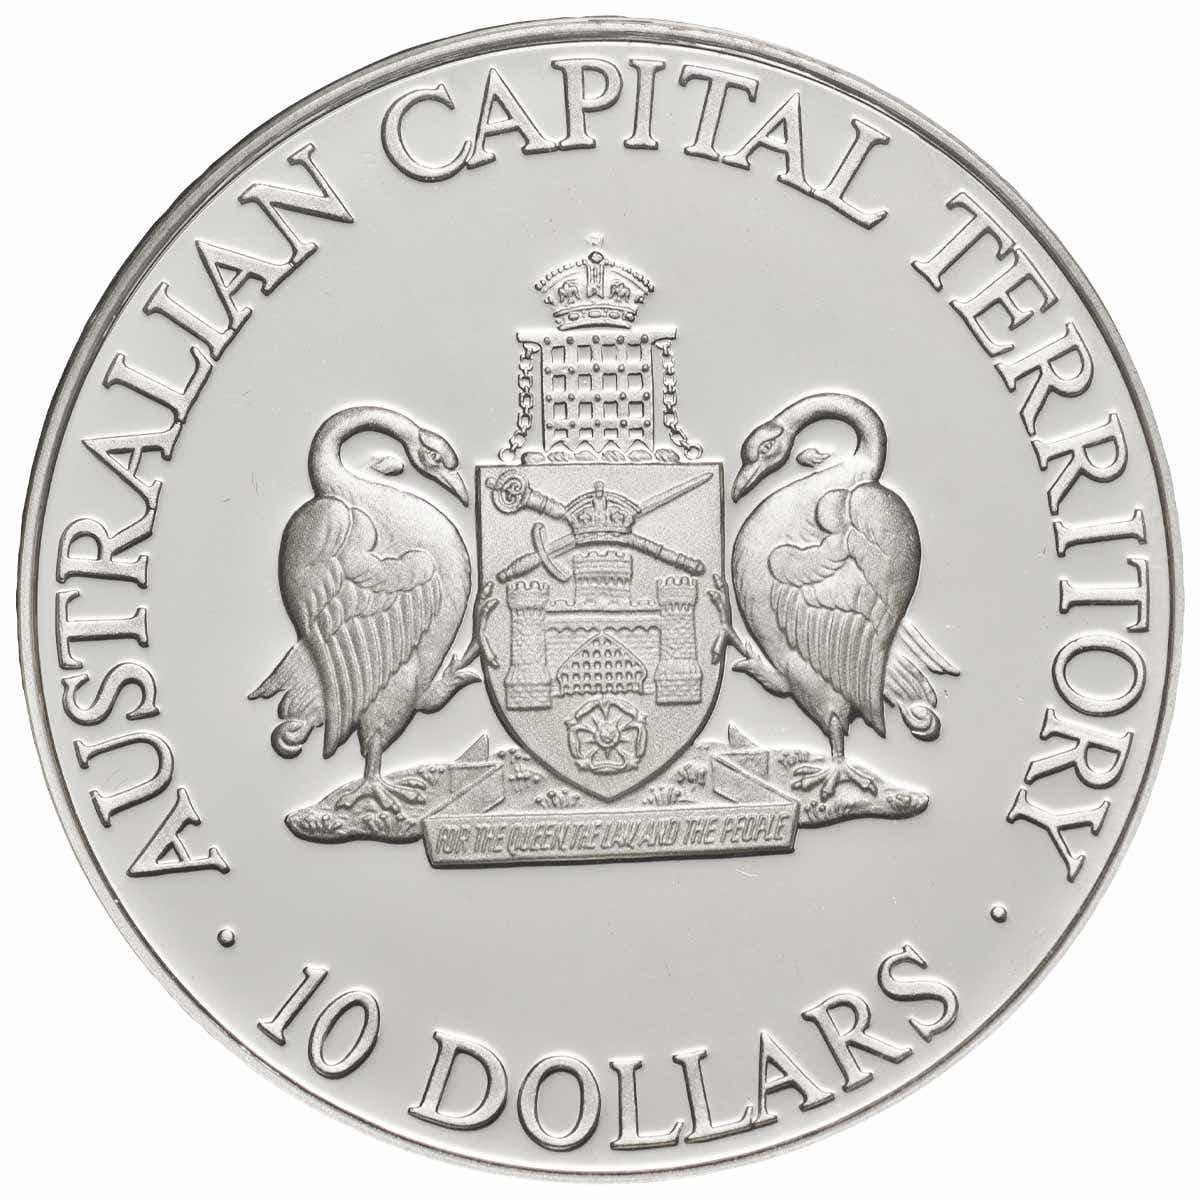 1993 $10 Australian Capitial Territory Silver Proof Coin